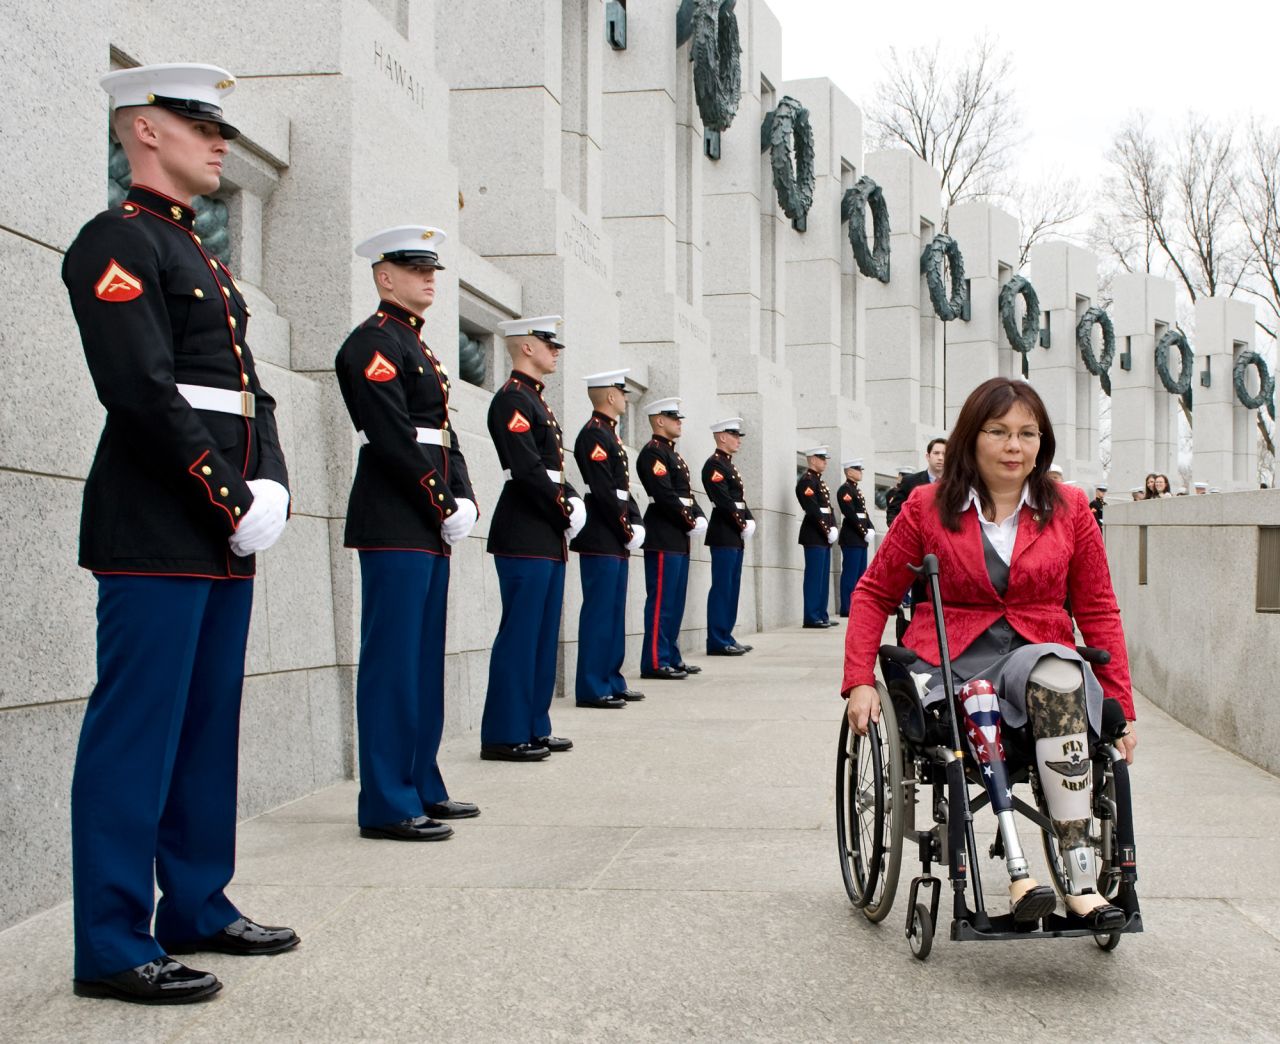 US Sen. Tammy Duckworth arrives at the World War II Memorial in Washington, DC, for a 2010 ceremony honoring World War II veterans who fought in the Pacific. Duckworth, a veteran herself, became a double amputee when her helicopter was shot down in Iraq in 2004. After returning to the United States, Duckworth began her political career as a congresswoman and then later became a senator. In 2018, she became the first US senator to give birth while in office. "Parenthood isn't just a women's issue," she said in a statement announcing the birth of her second daughter. "It's an economic issue and one that affects all parents — men and women alike."